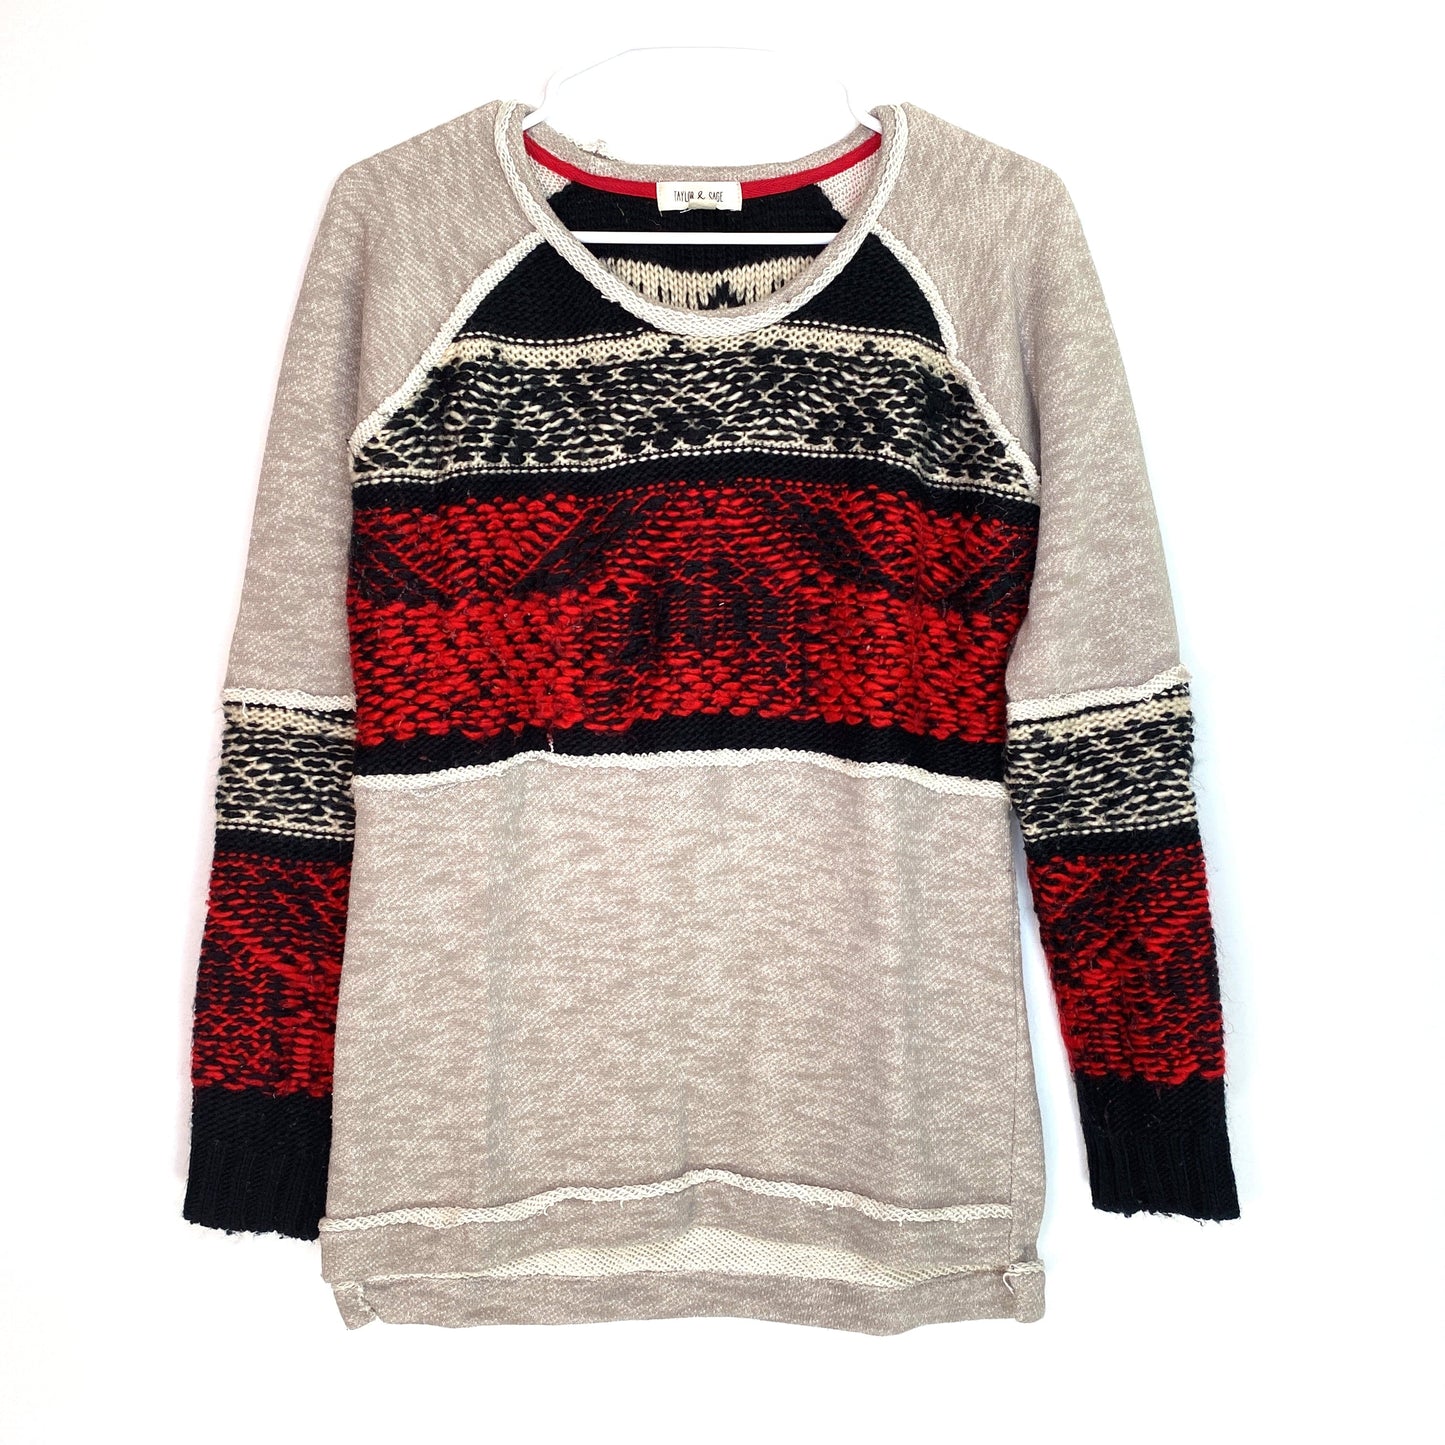 TAYLOR & SAGE Womens Size M Pullover Crochet Sweater Gray Red Black